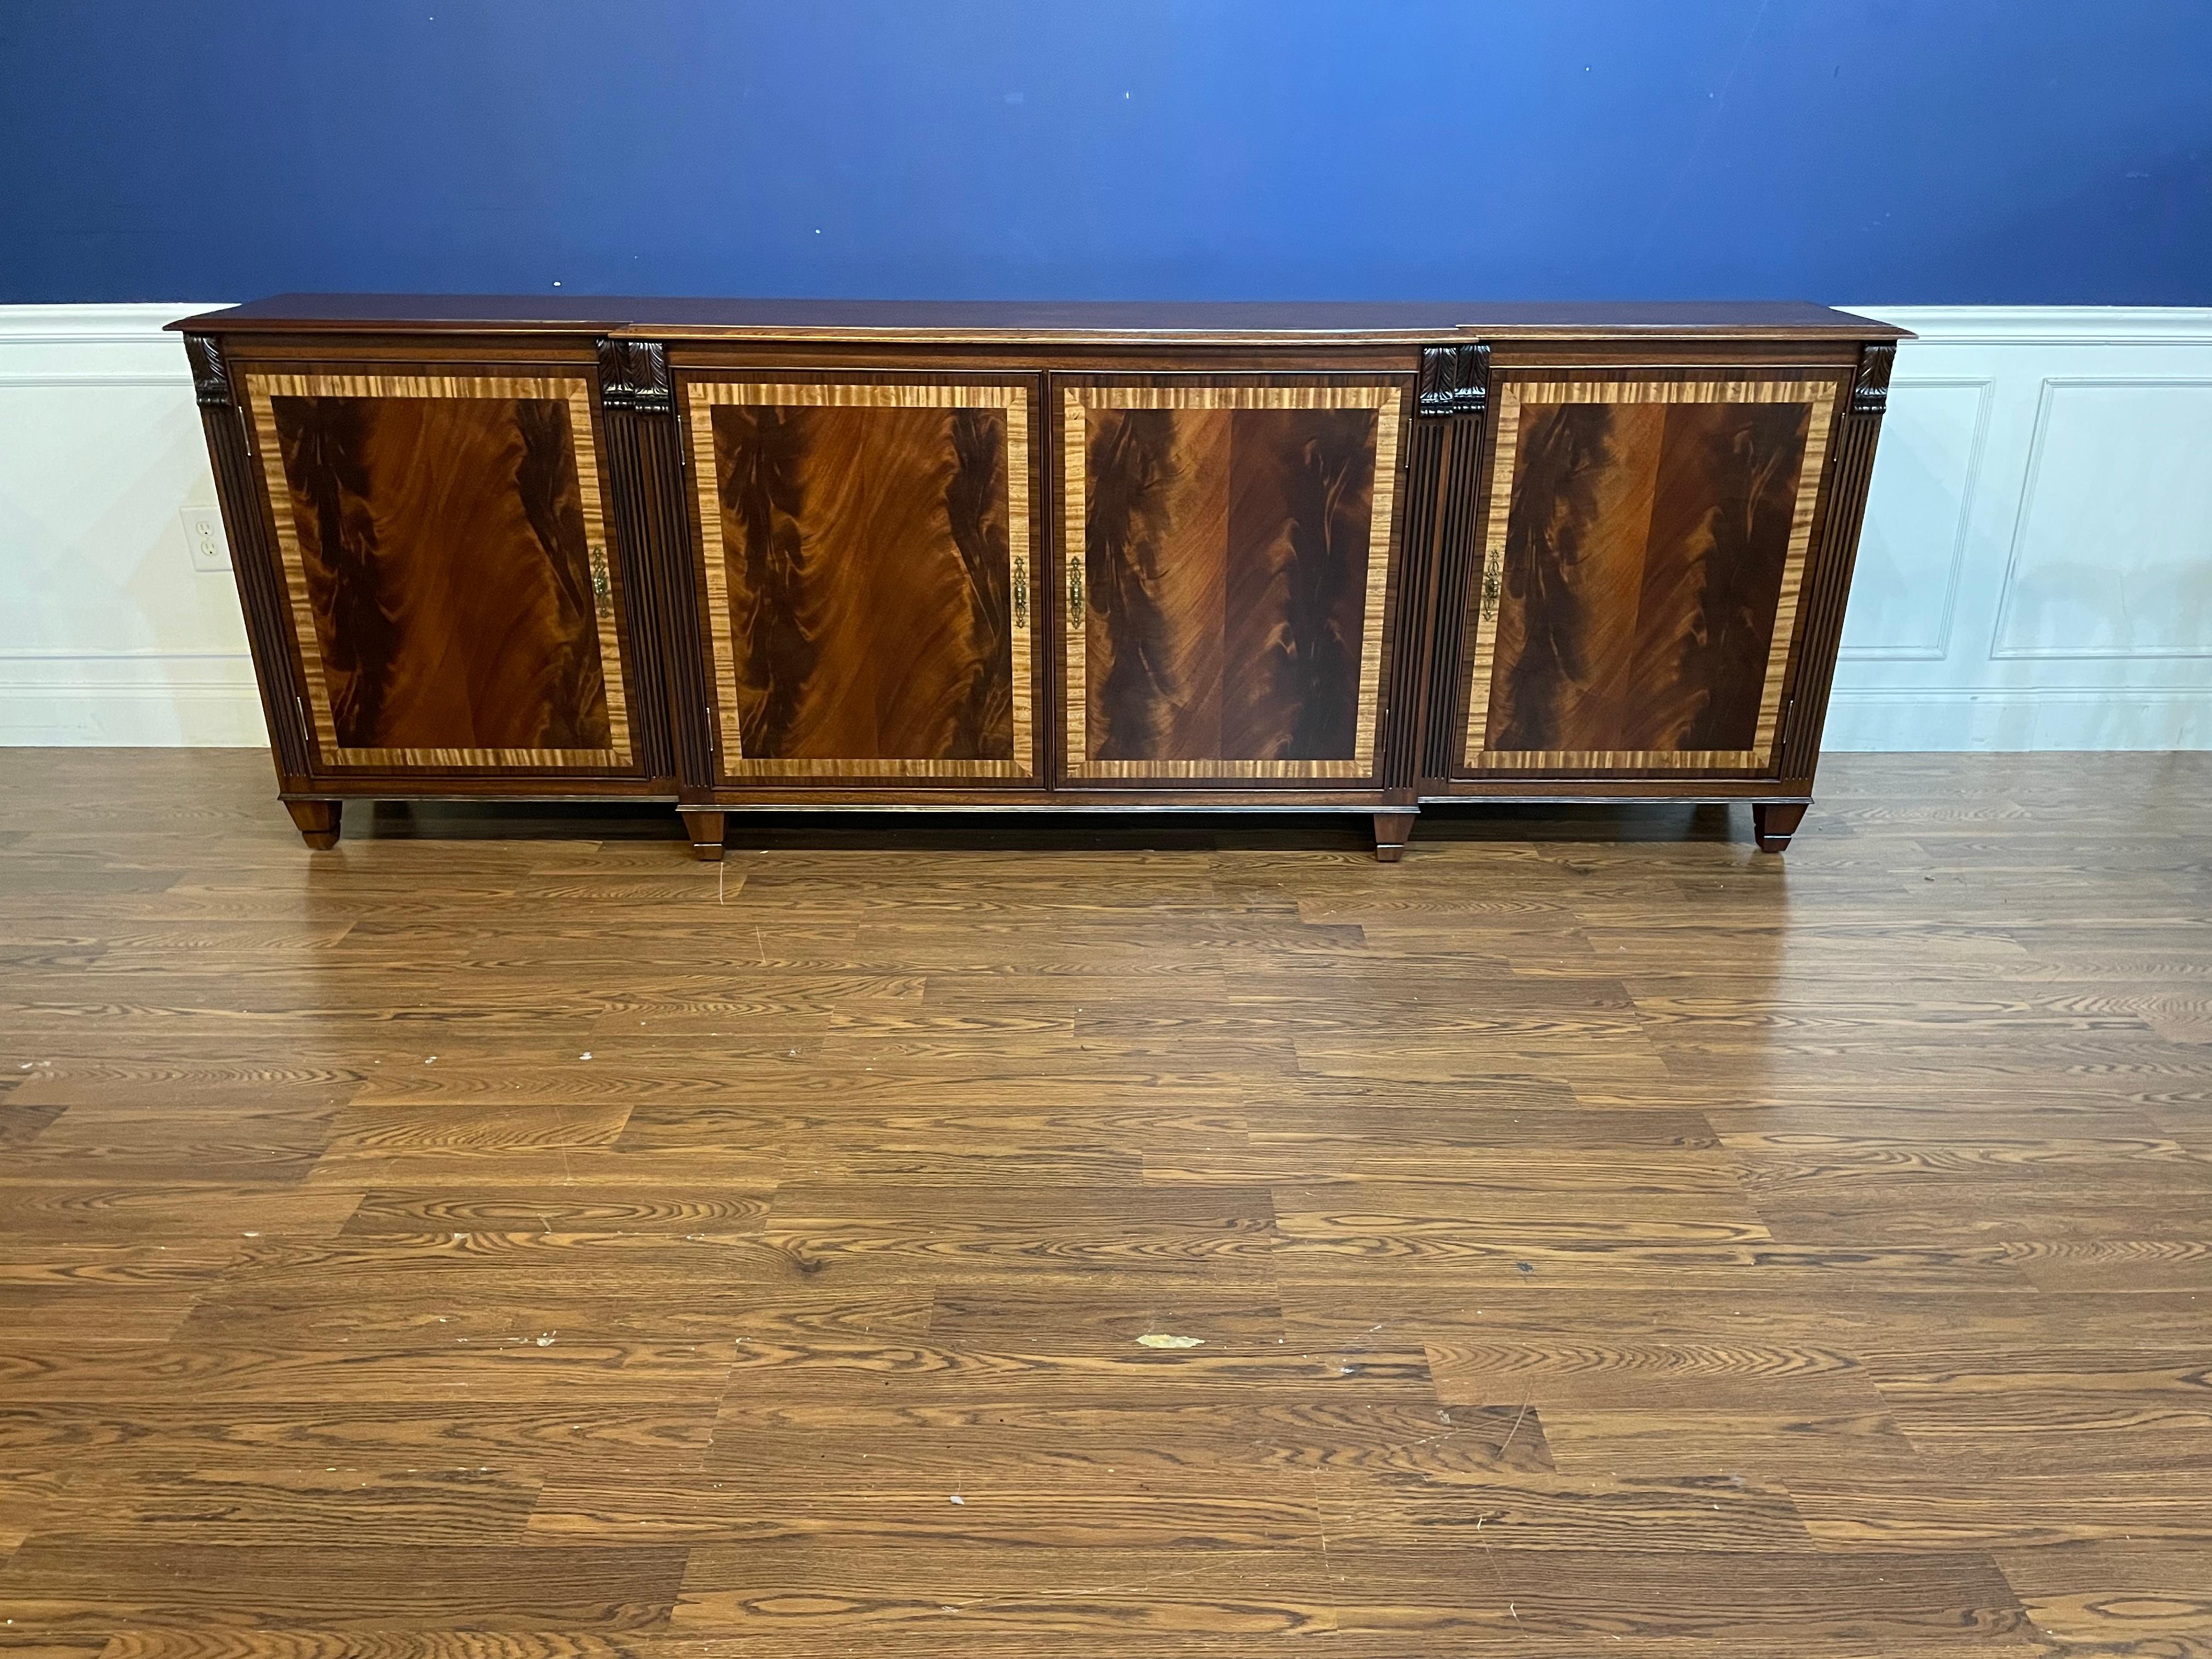 This is made-to-order traditional mahogany four door buffet or credenza made in the Leighton Hall shop. It features four doors with reverse-slip-match swirly crotch mahogany fields and Satinwood and Santos Rosewood (Pau Ferro) borders. It has a